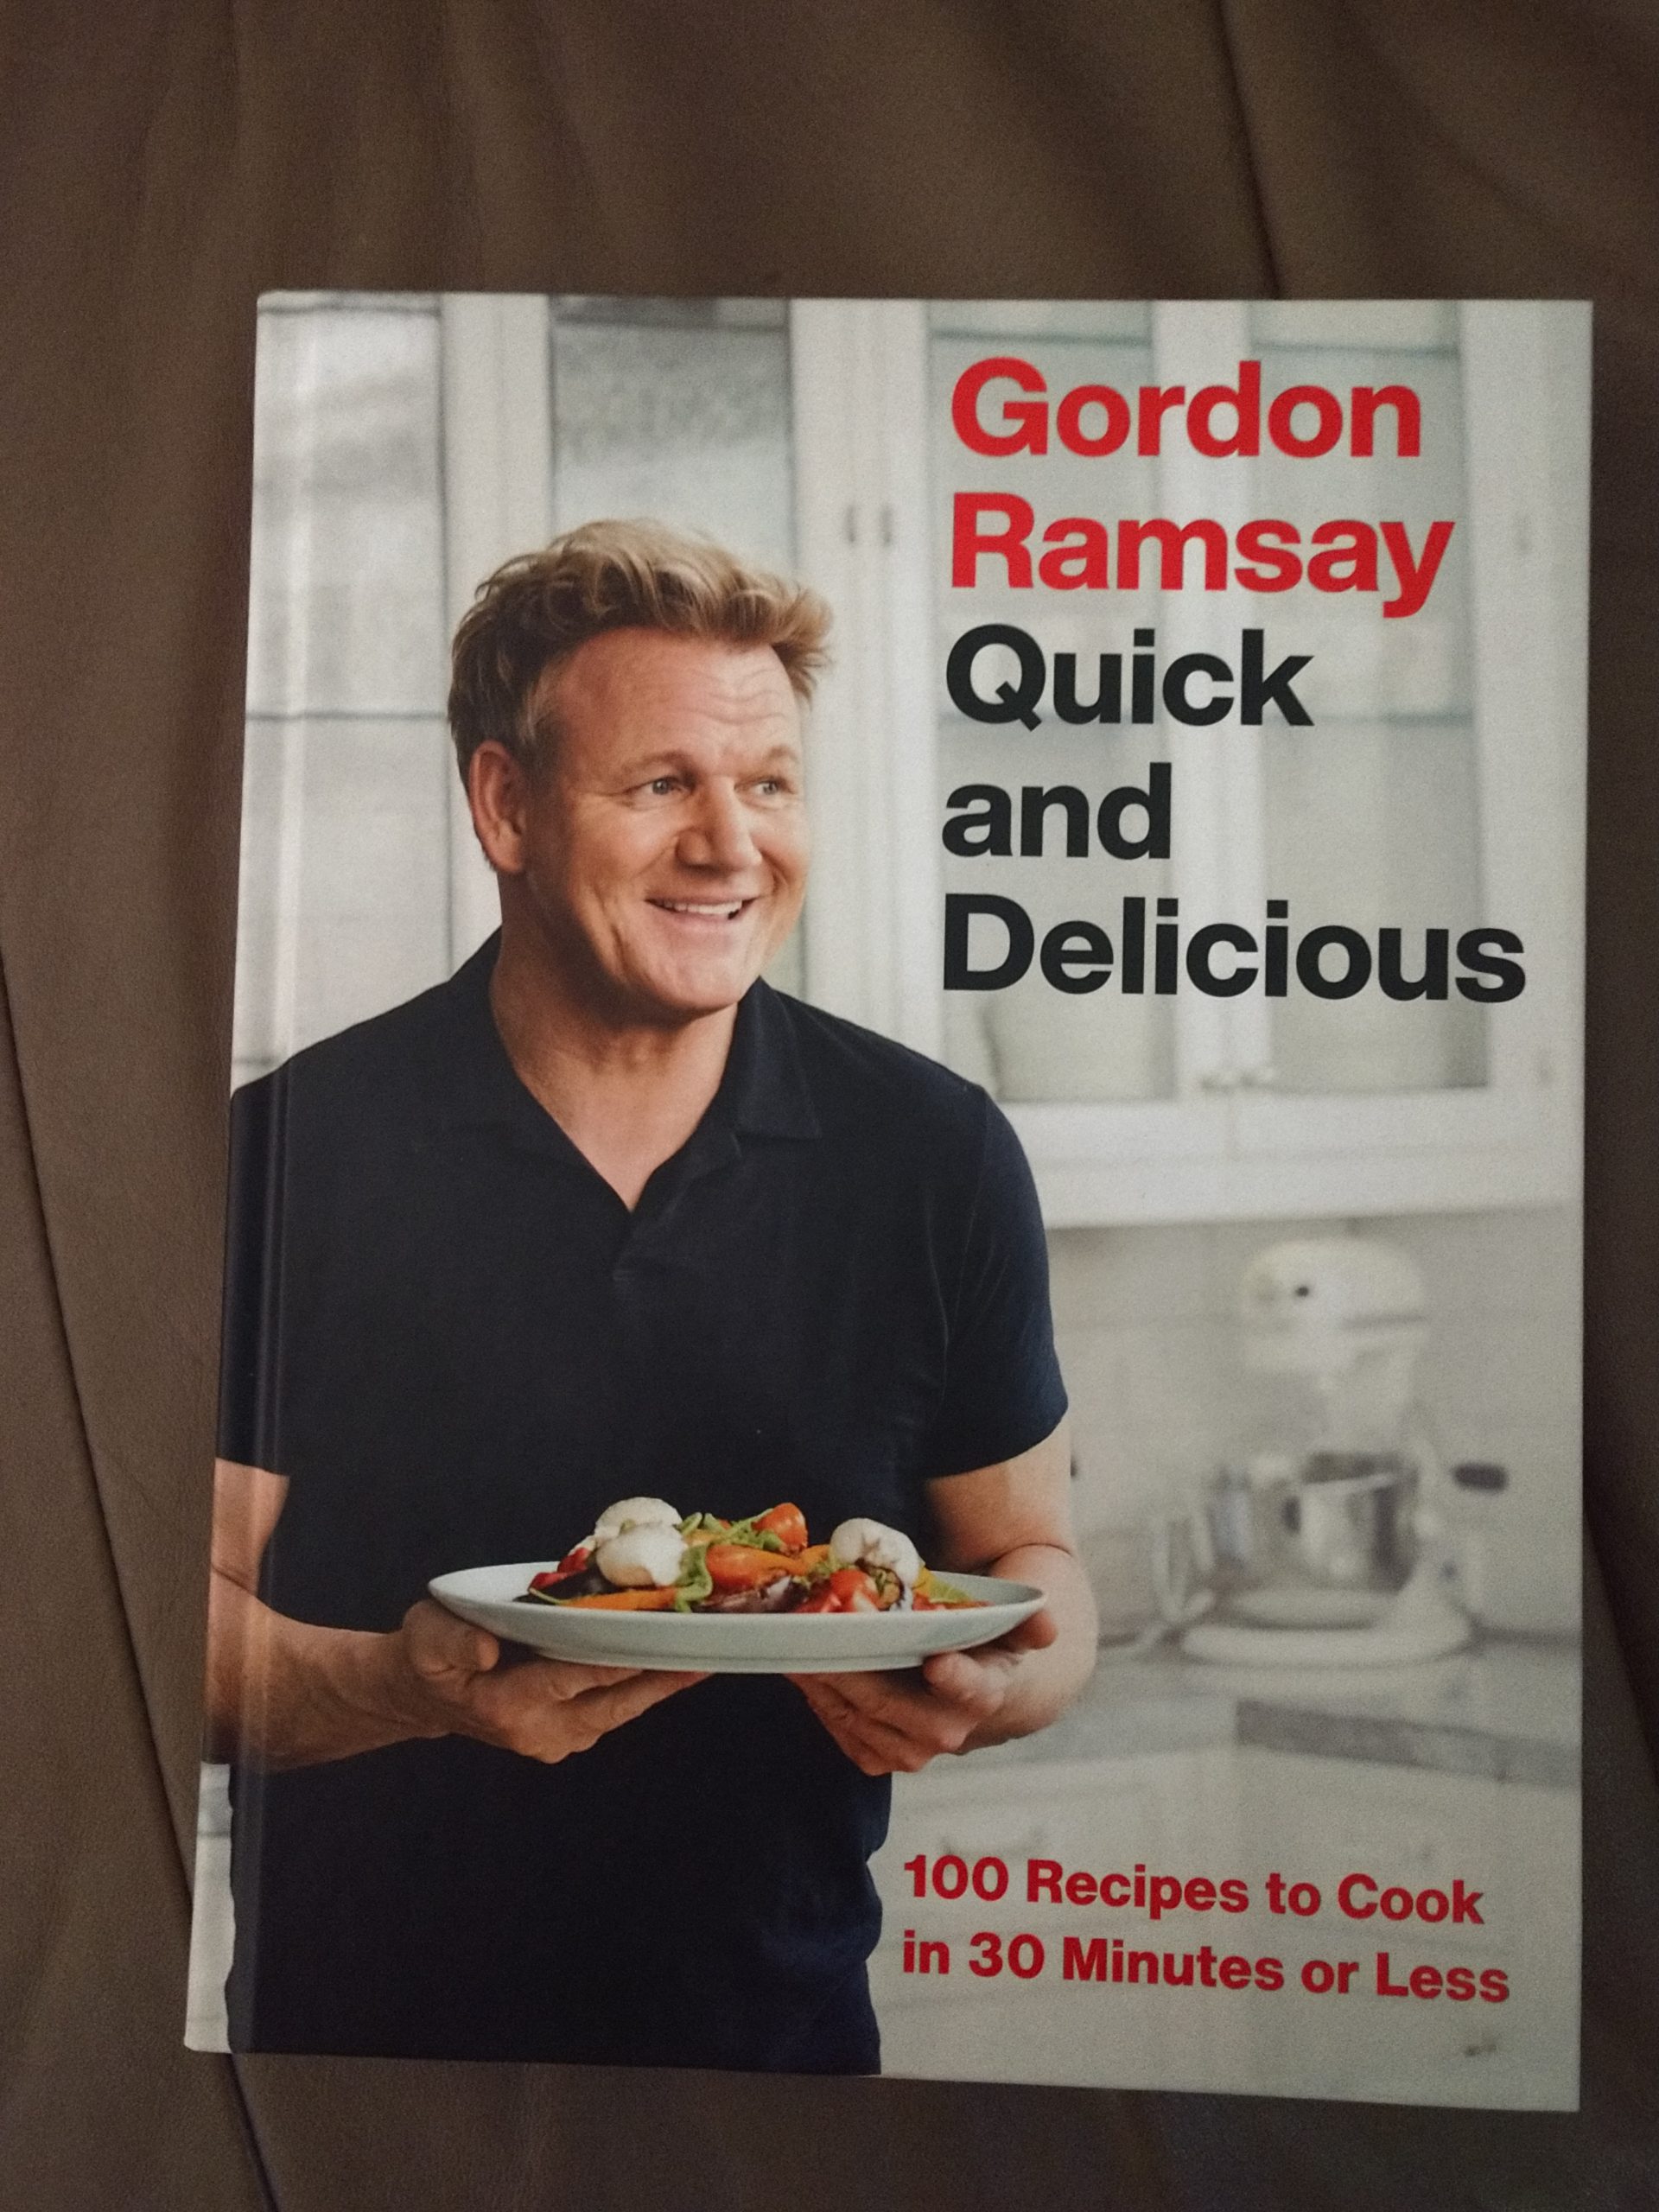 Gordon Ramsay's Quick and Delicious Book Review - Central Minnesota Mom